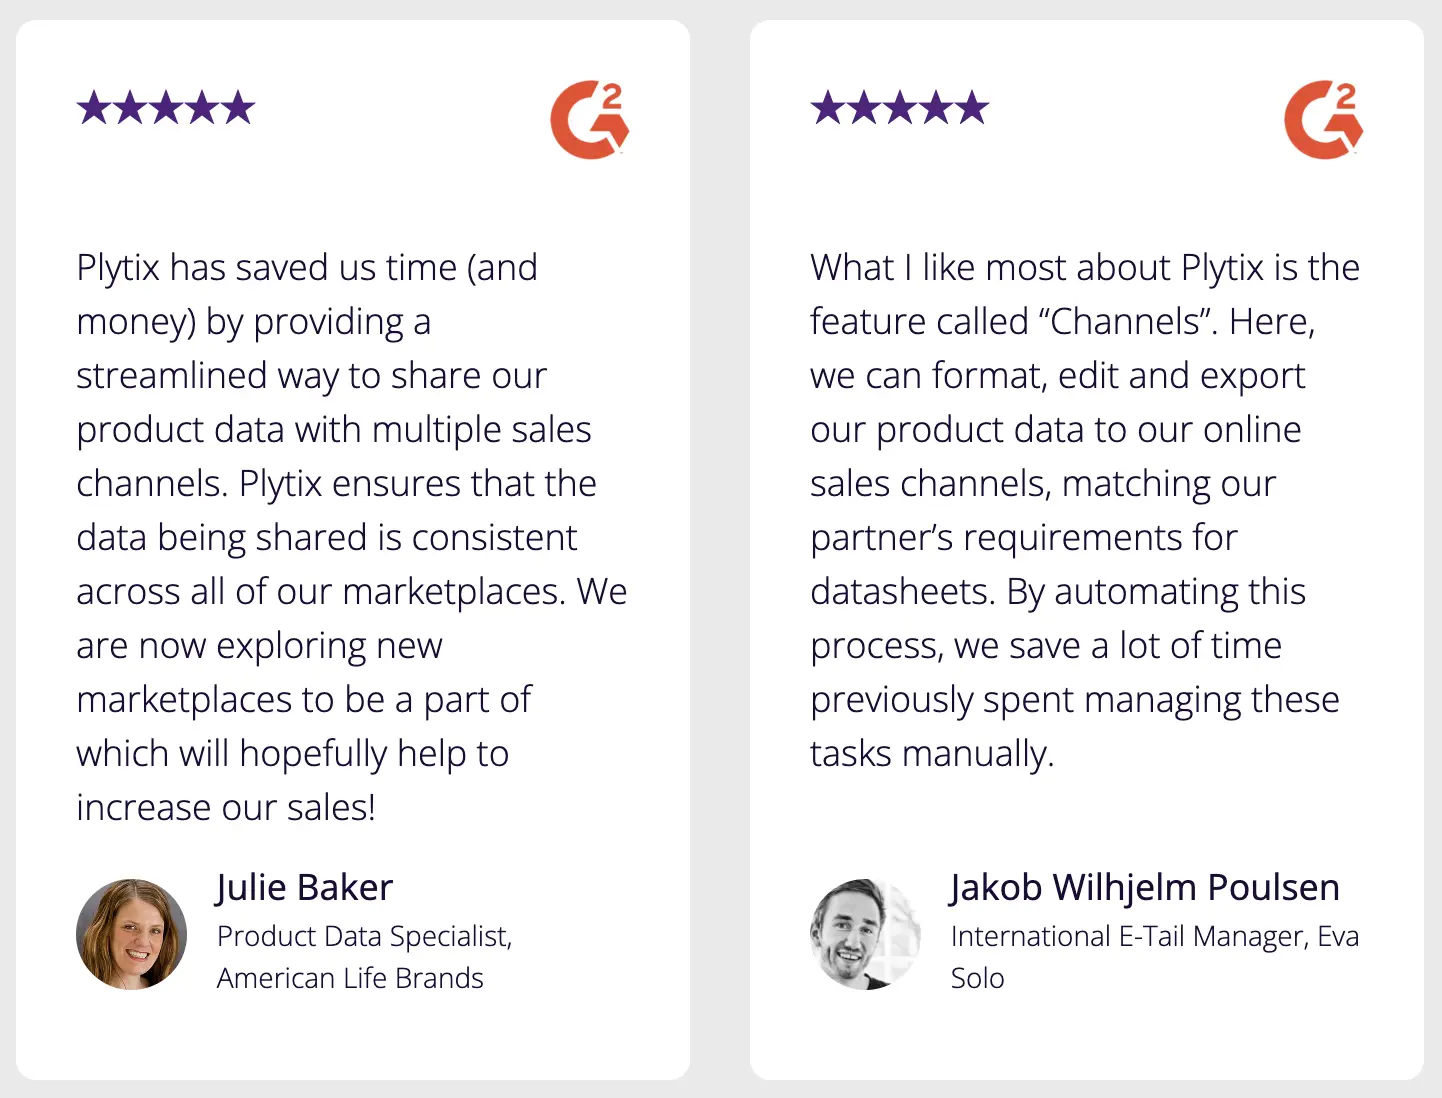 Reivews from customers about Plytix and how Plytix PIM helped with their product feeds to different channels